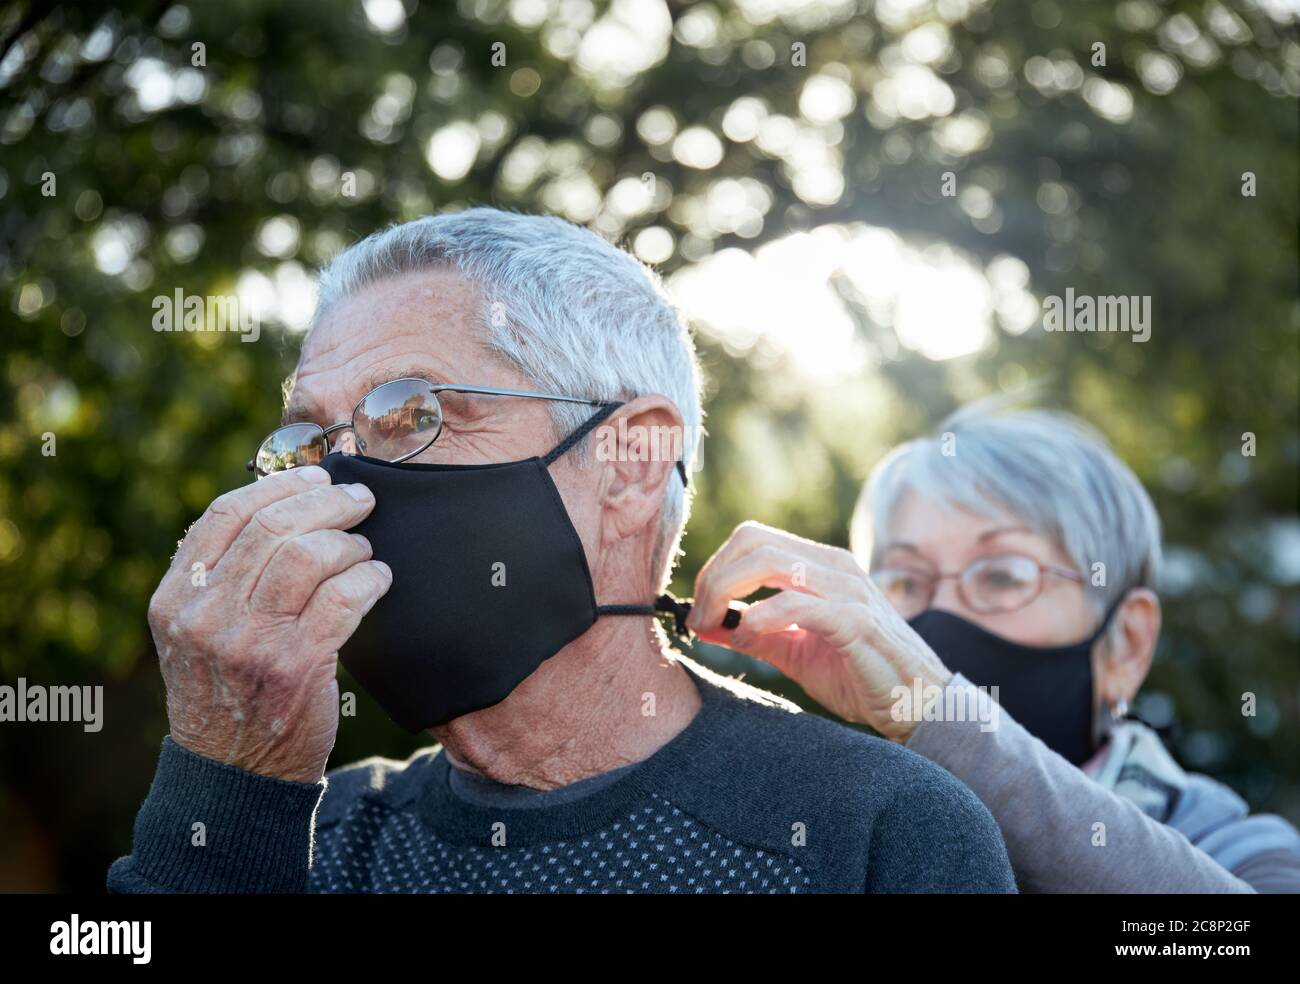 Active senior couple on outdoor walk wearing face masks. Woman helping man with mask. Stock Photo